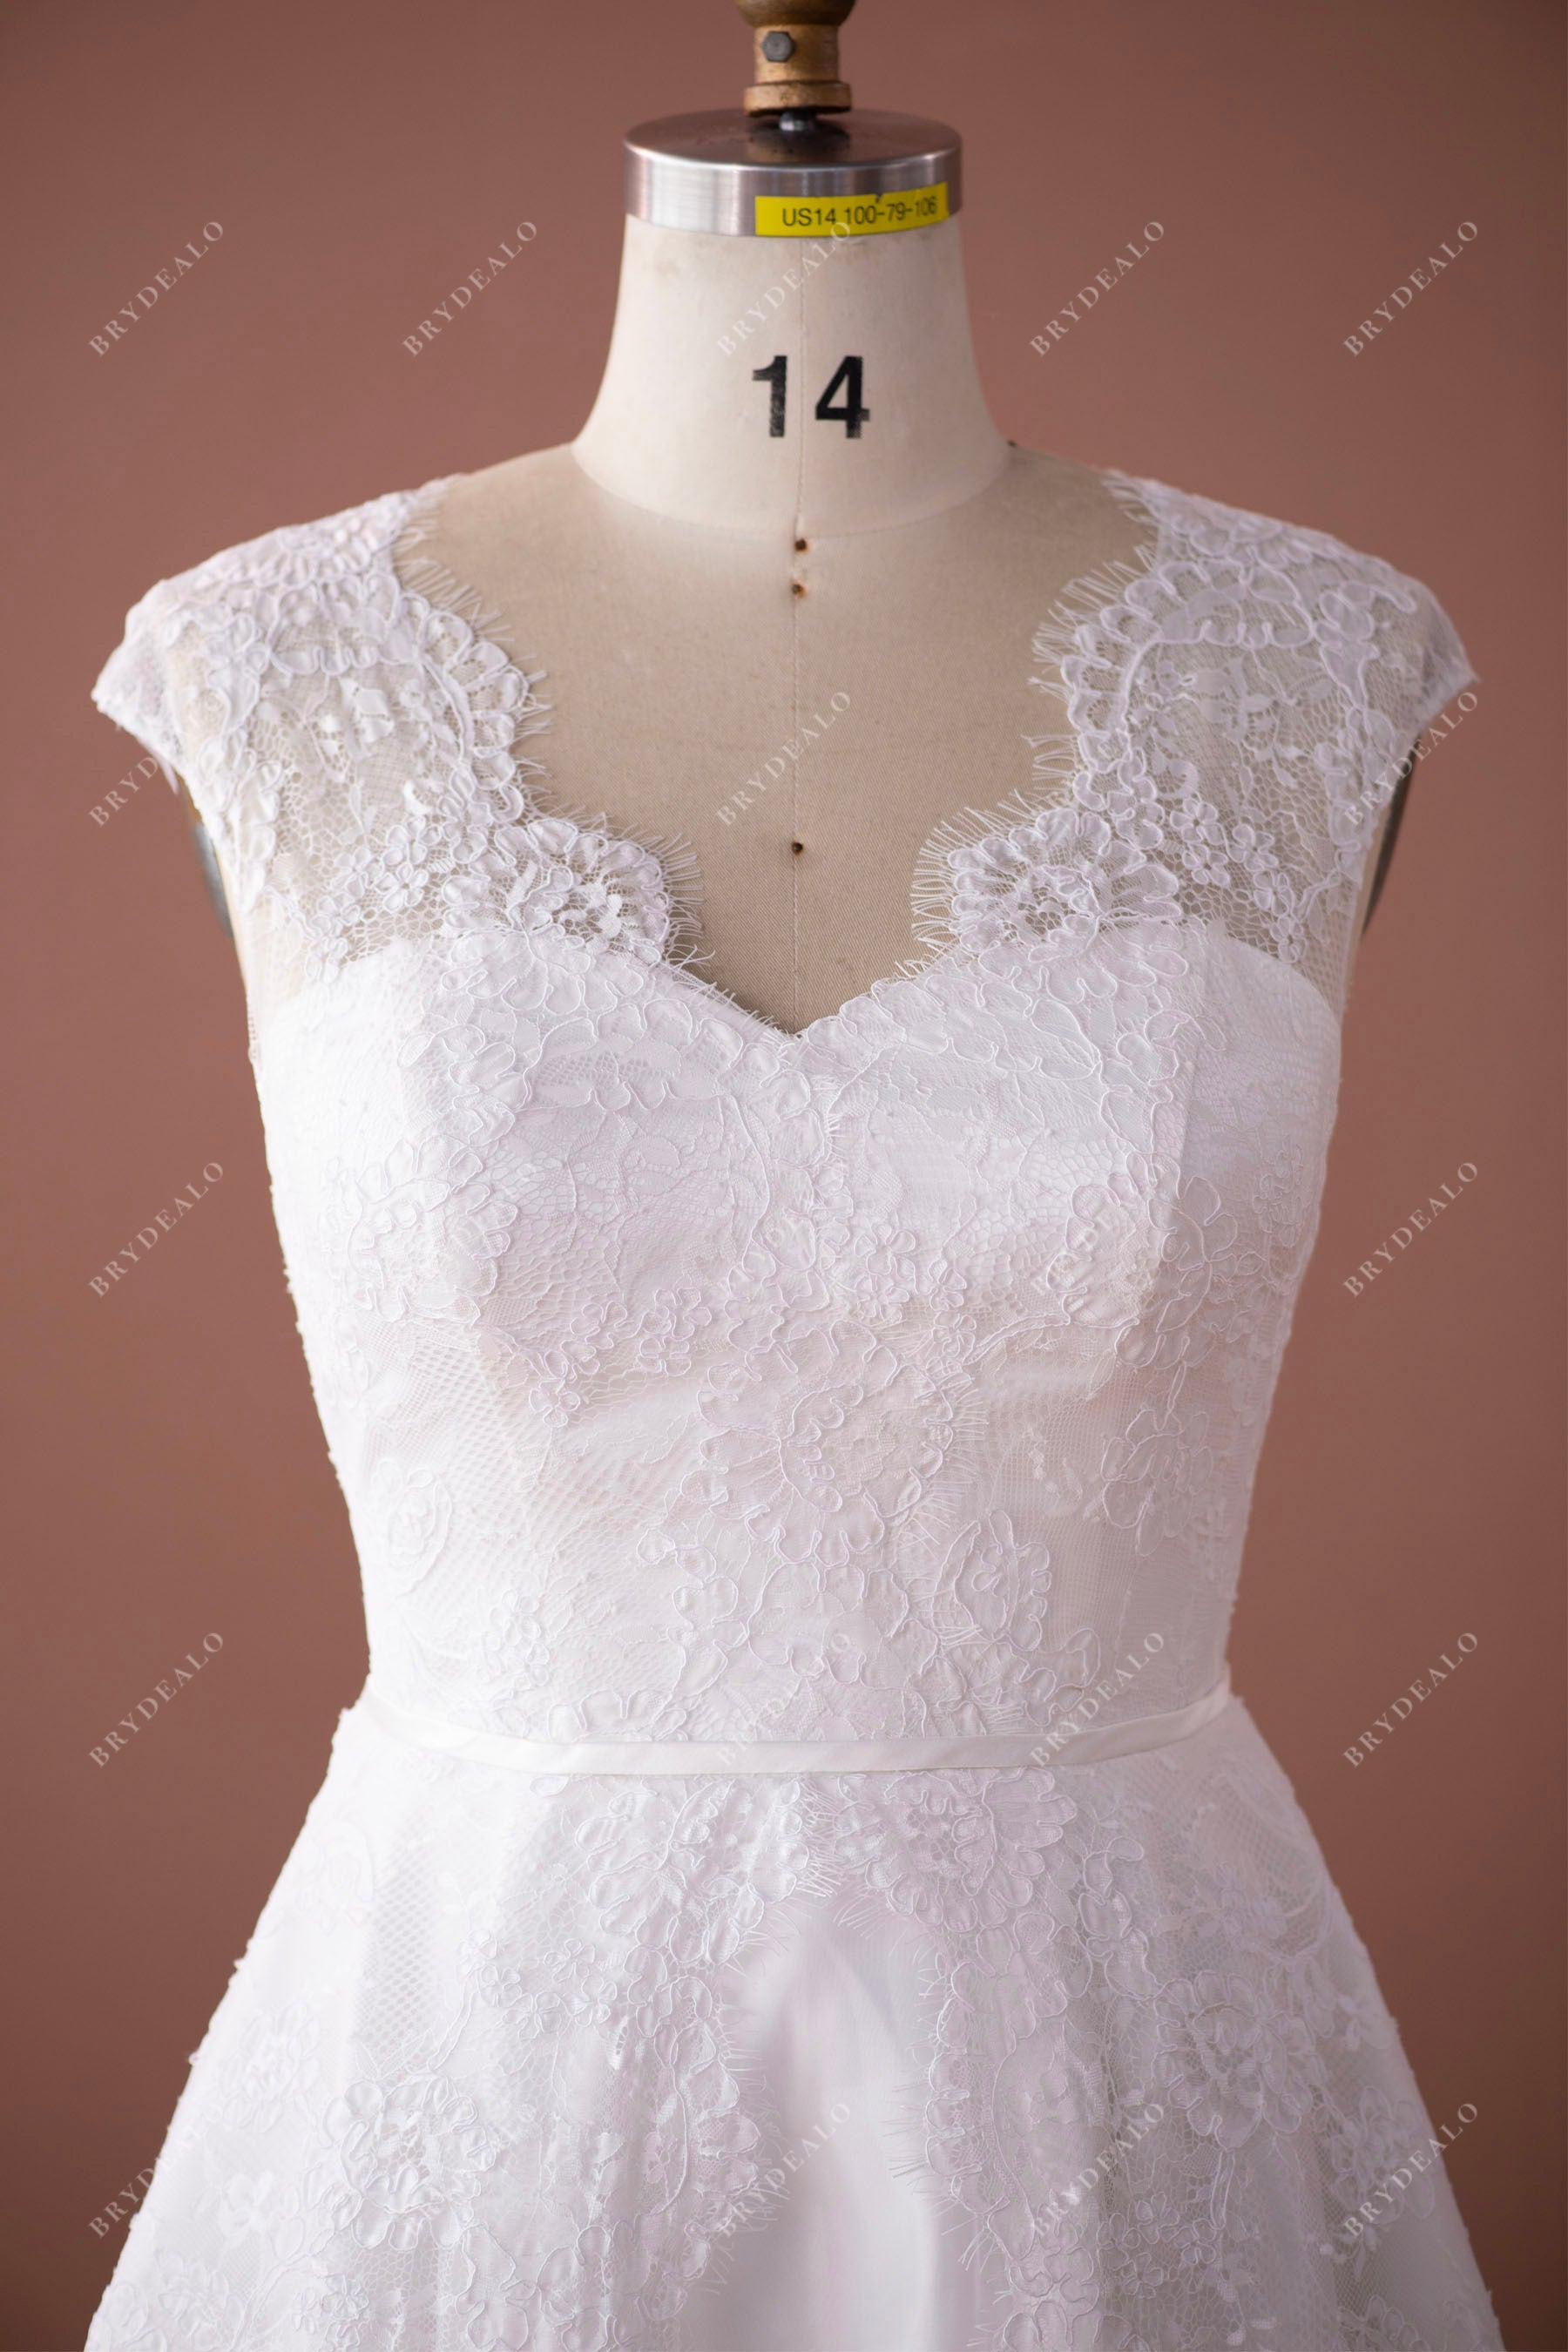 scalloped neck cap sleeves lace city wedding gown